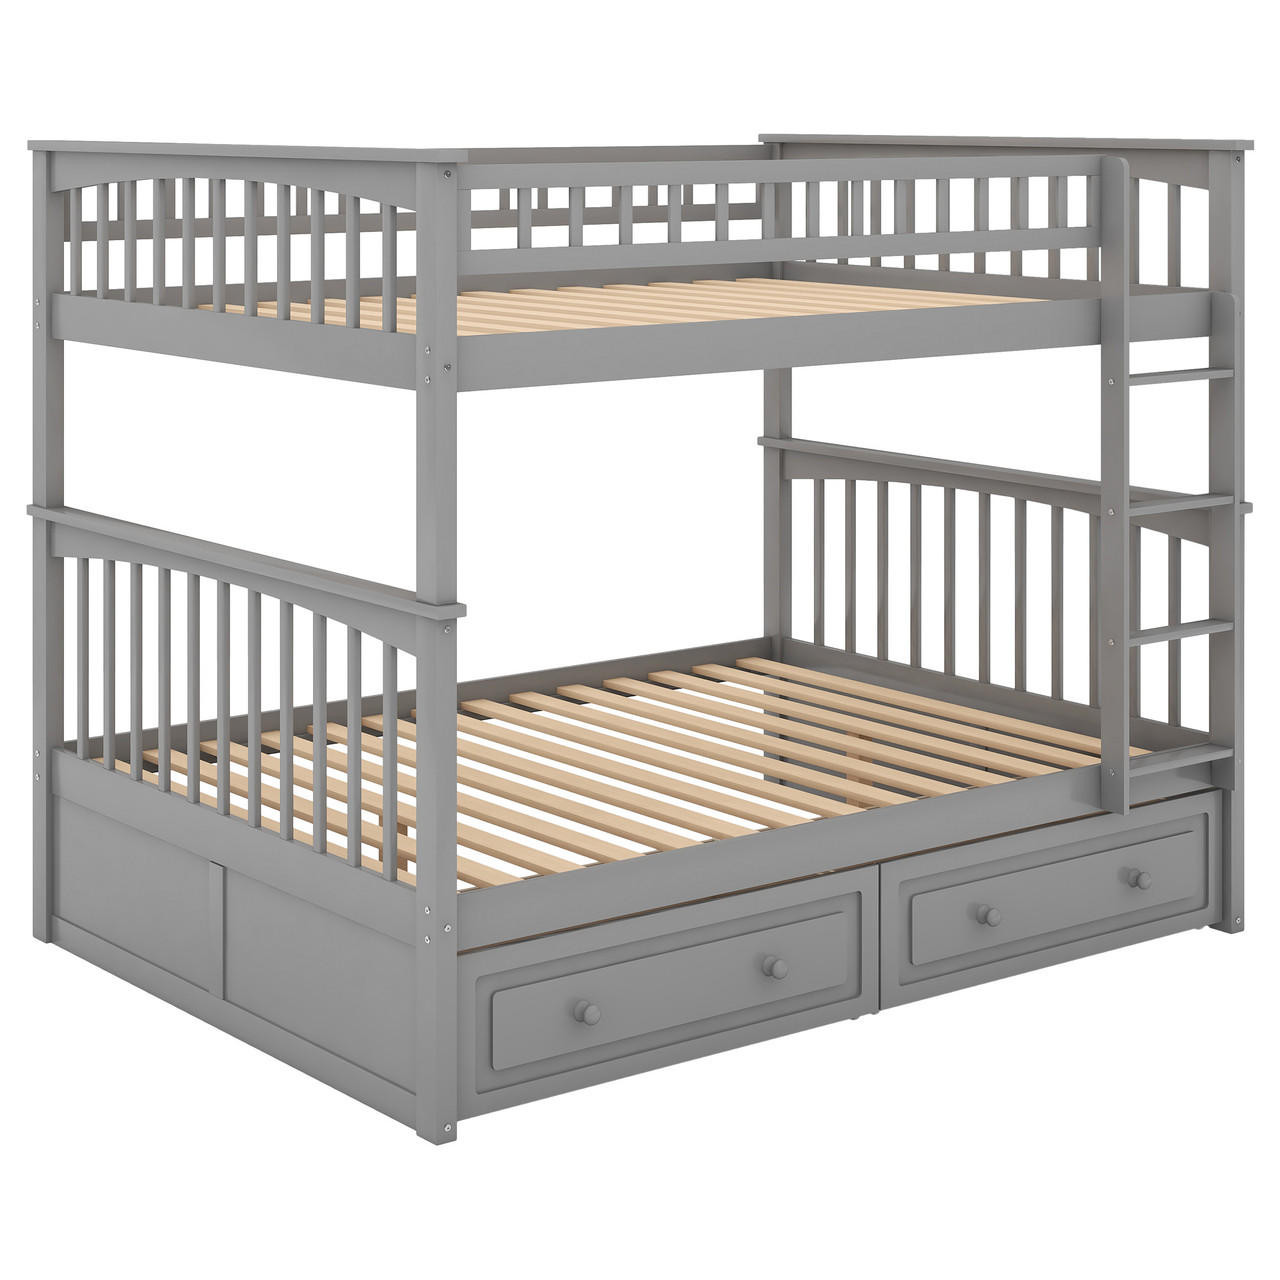 Chicken Pieces Full over Full Bunk Bed with Drawers, Convertible Beds 